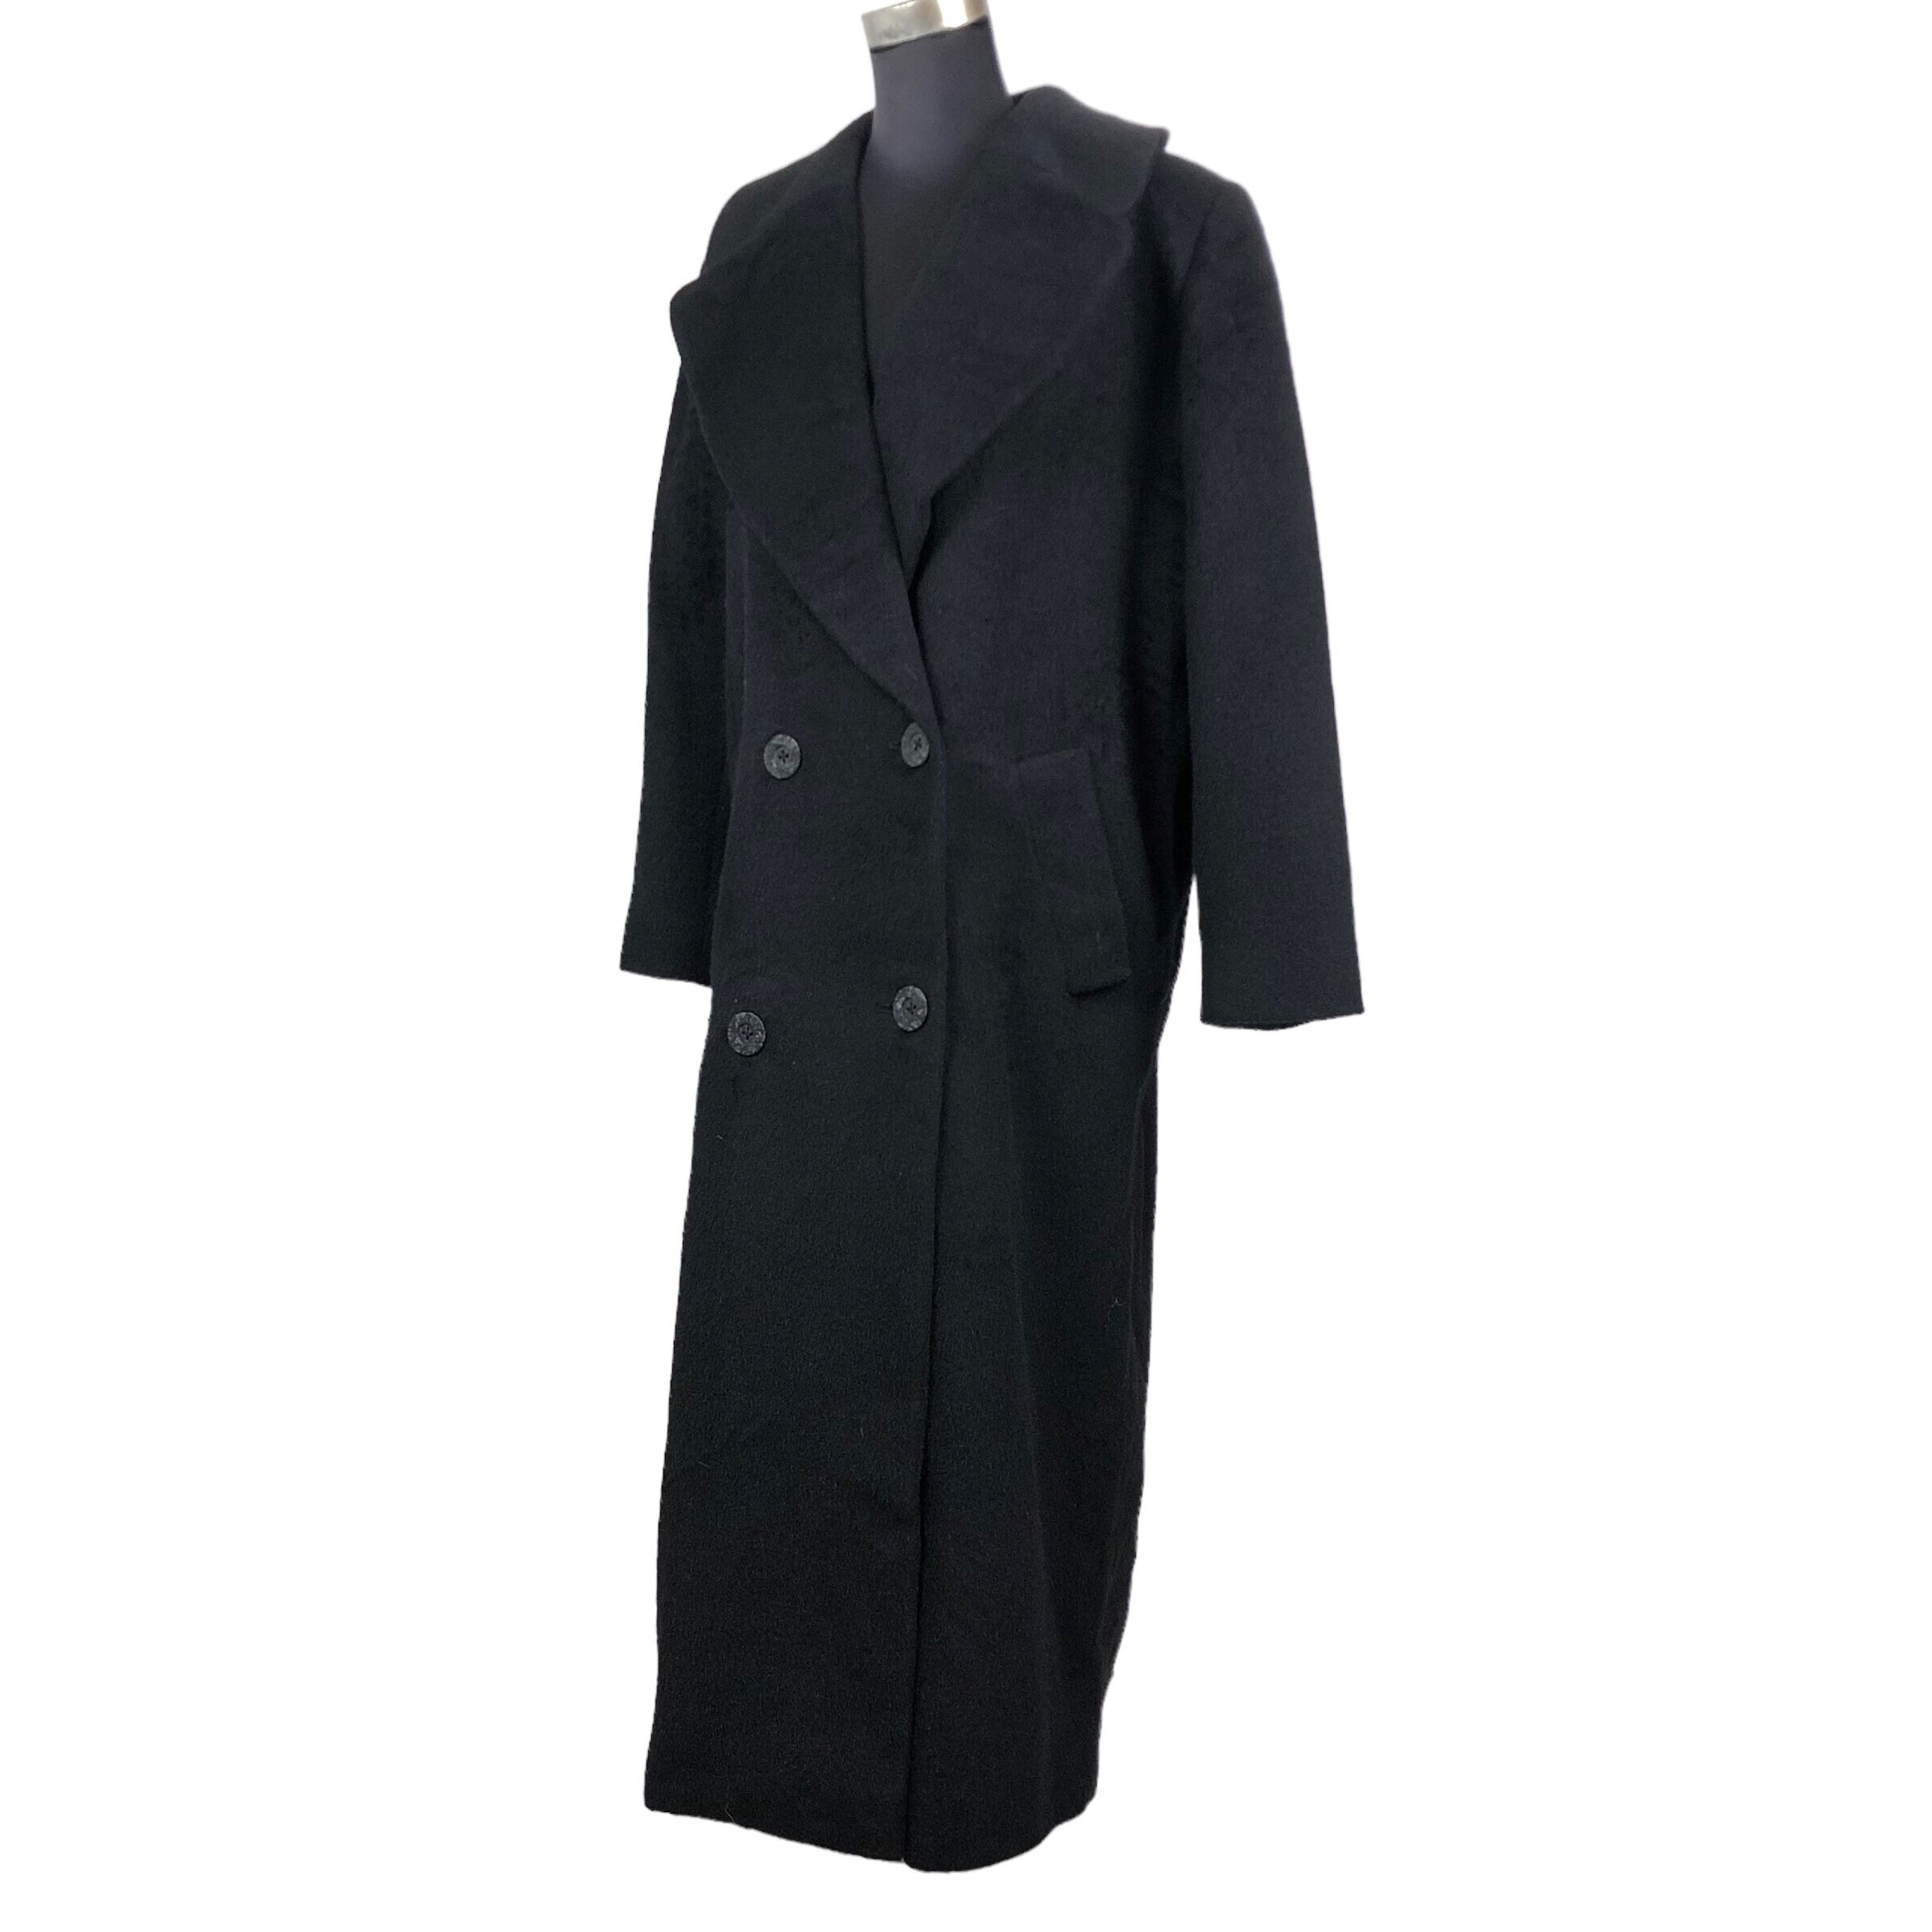 Vintage 90s Christian Dior Wool Trench Coat Lambswool Military Long ...